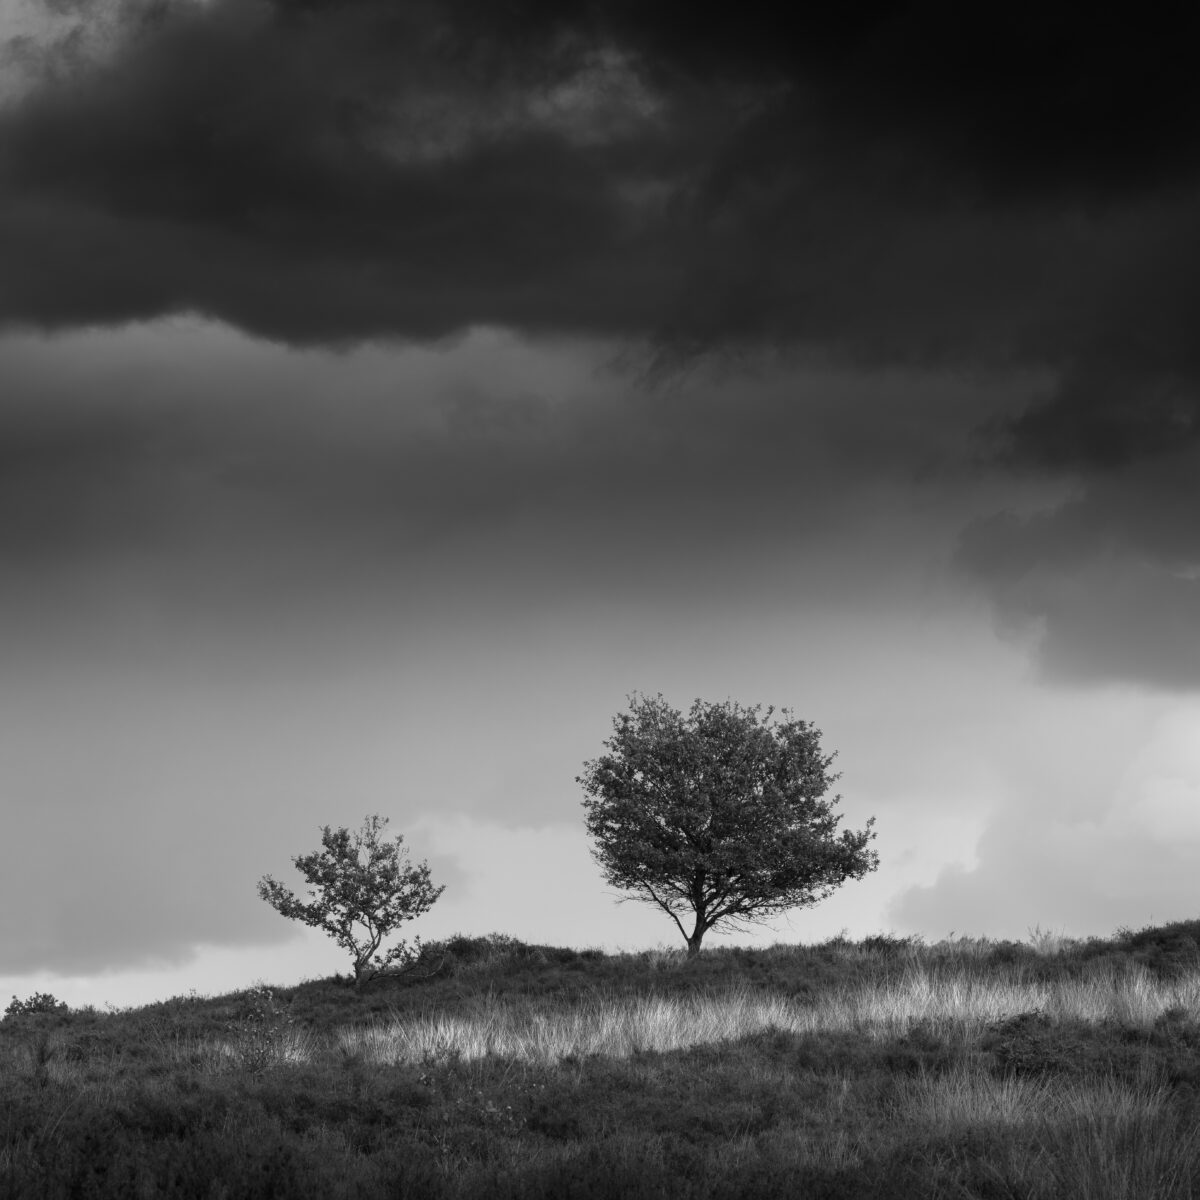 Two trees with some dark and light cloudy sky as background